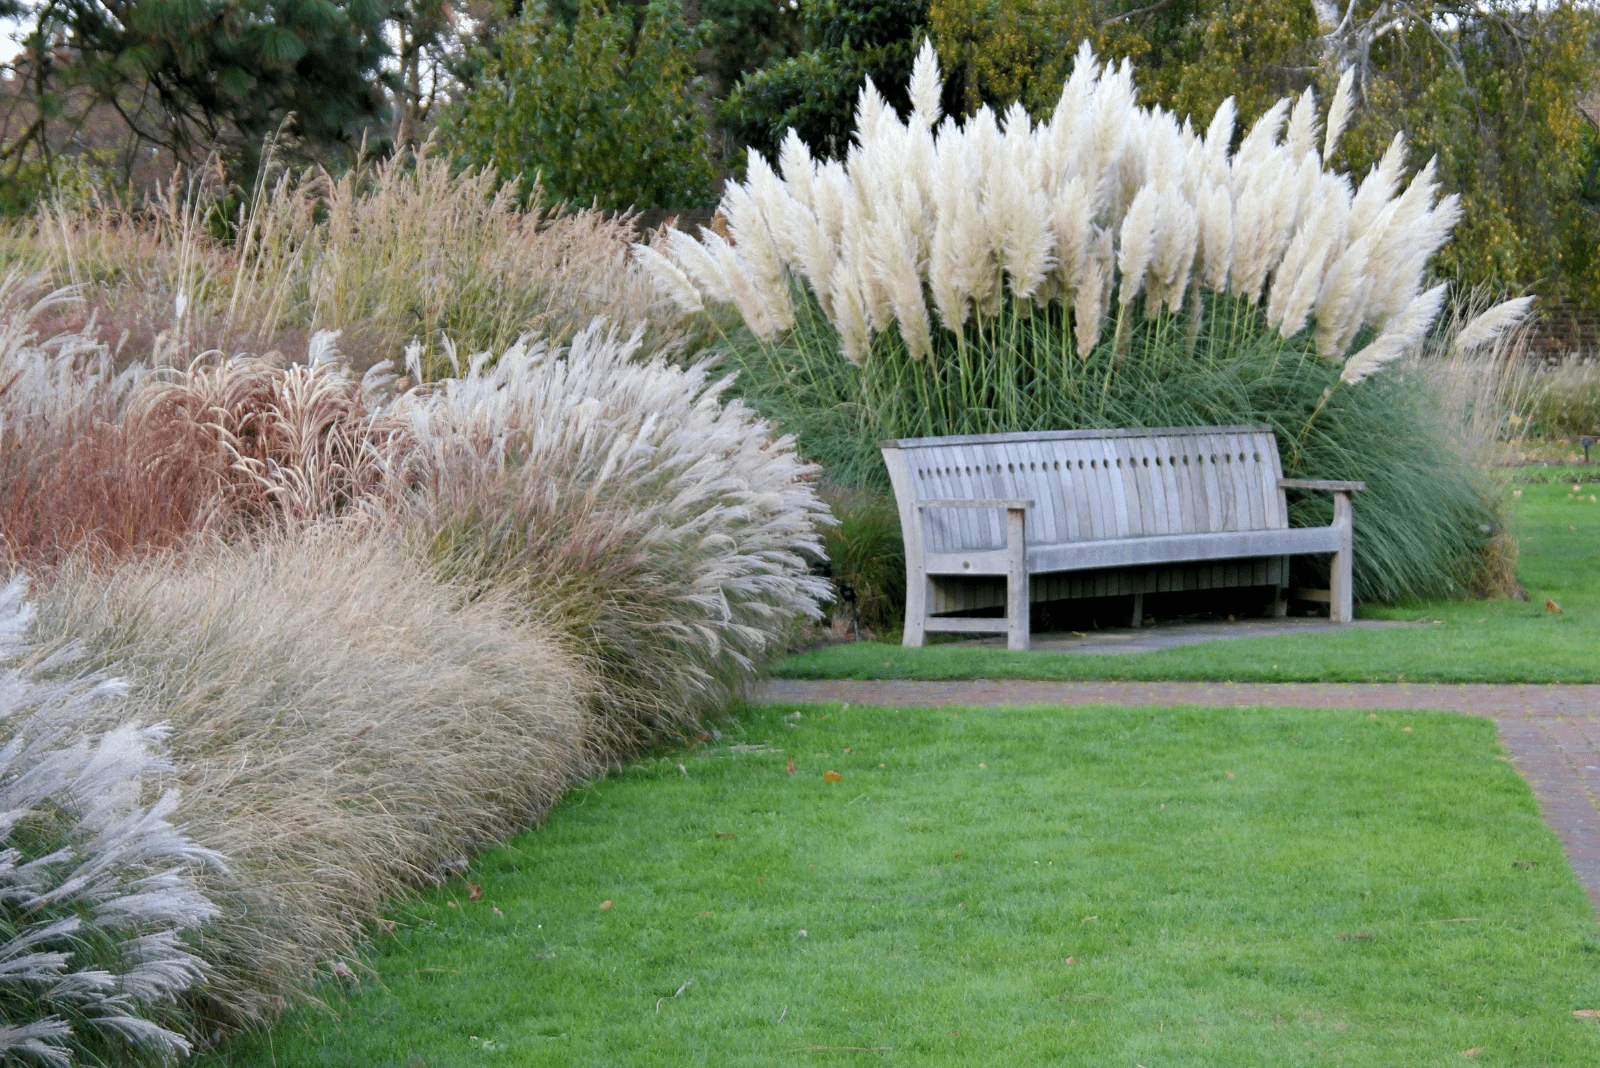 Park bench nestling in various grasses and pampas